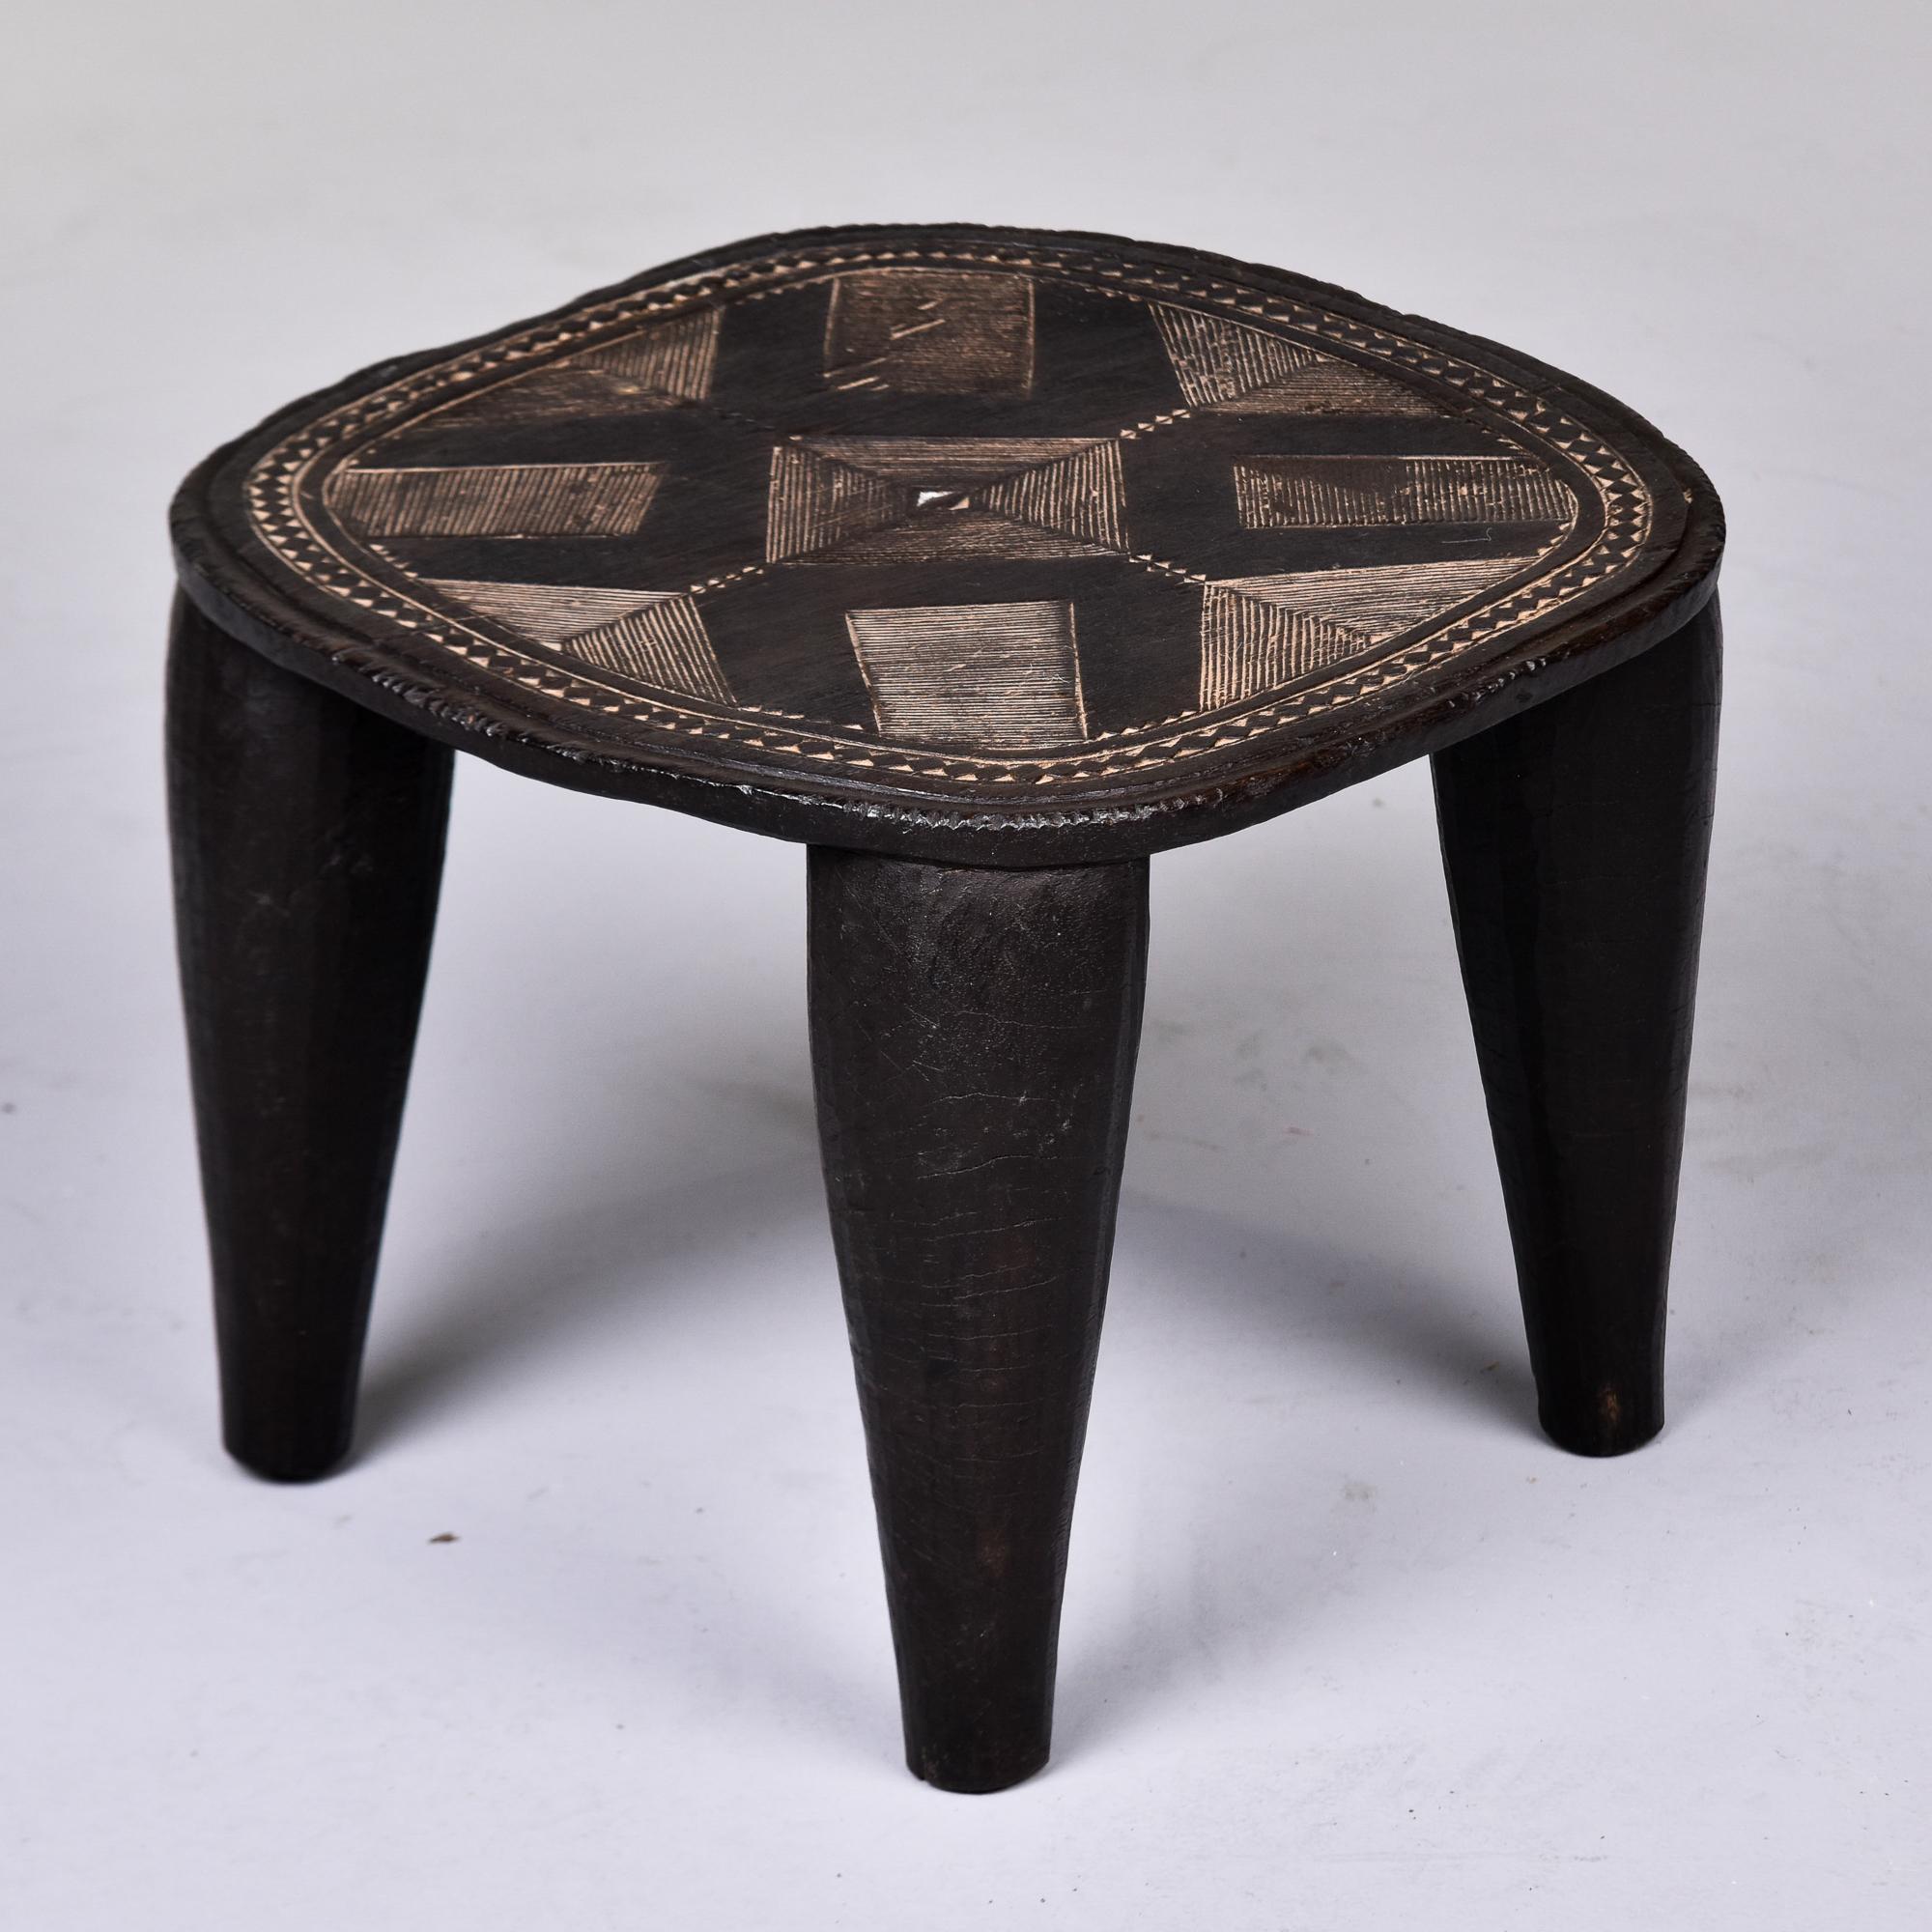  Found in Nigeria, this stool is attributed to the Nupe people of Nigeria and dates from the late 1980s / early 1990s. Hand carved from a dense, heavy wood, this stool has thick, tapered legs and an abstract, decorative pattern carved into the seat